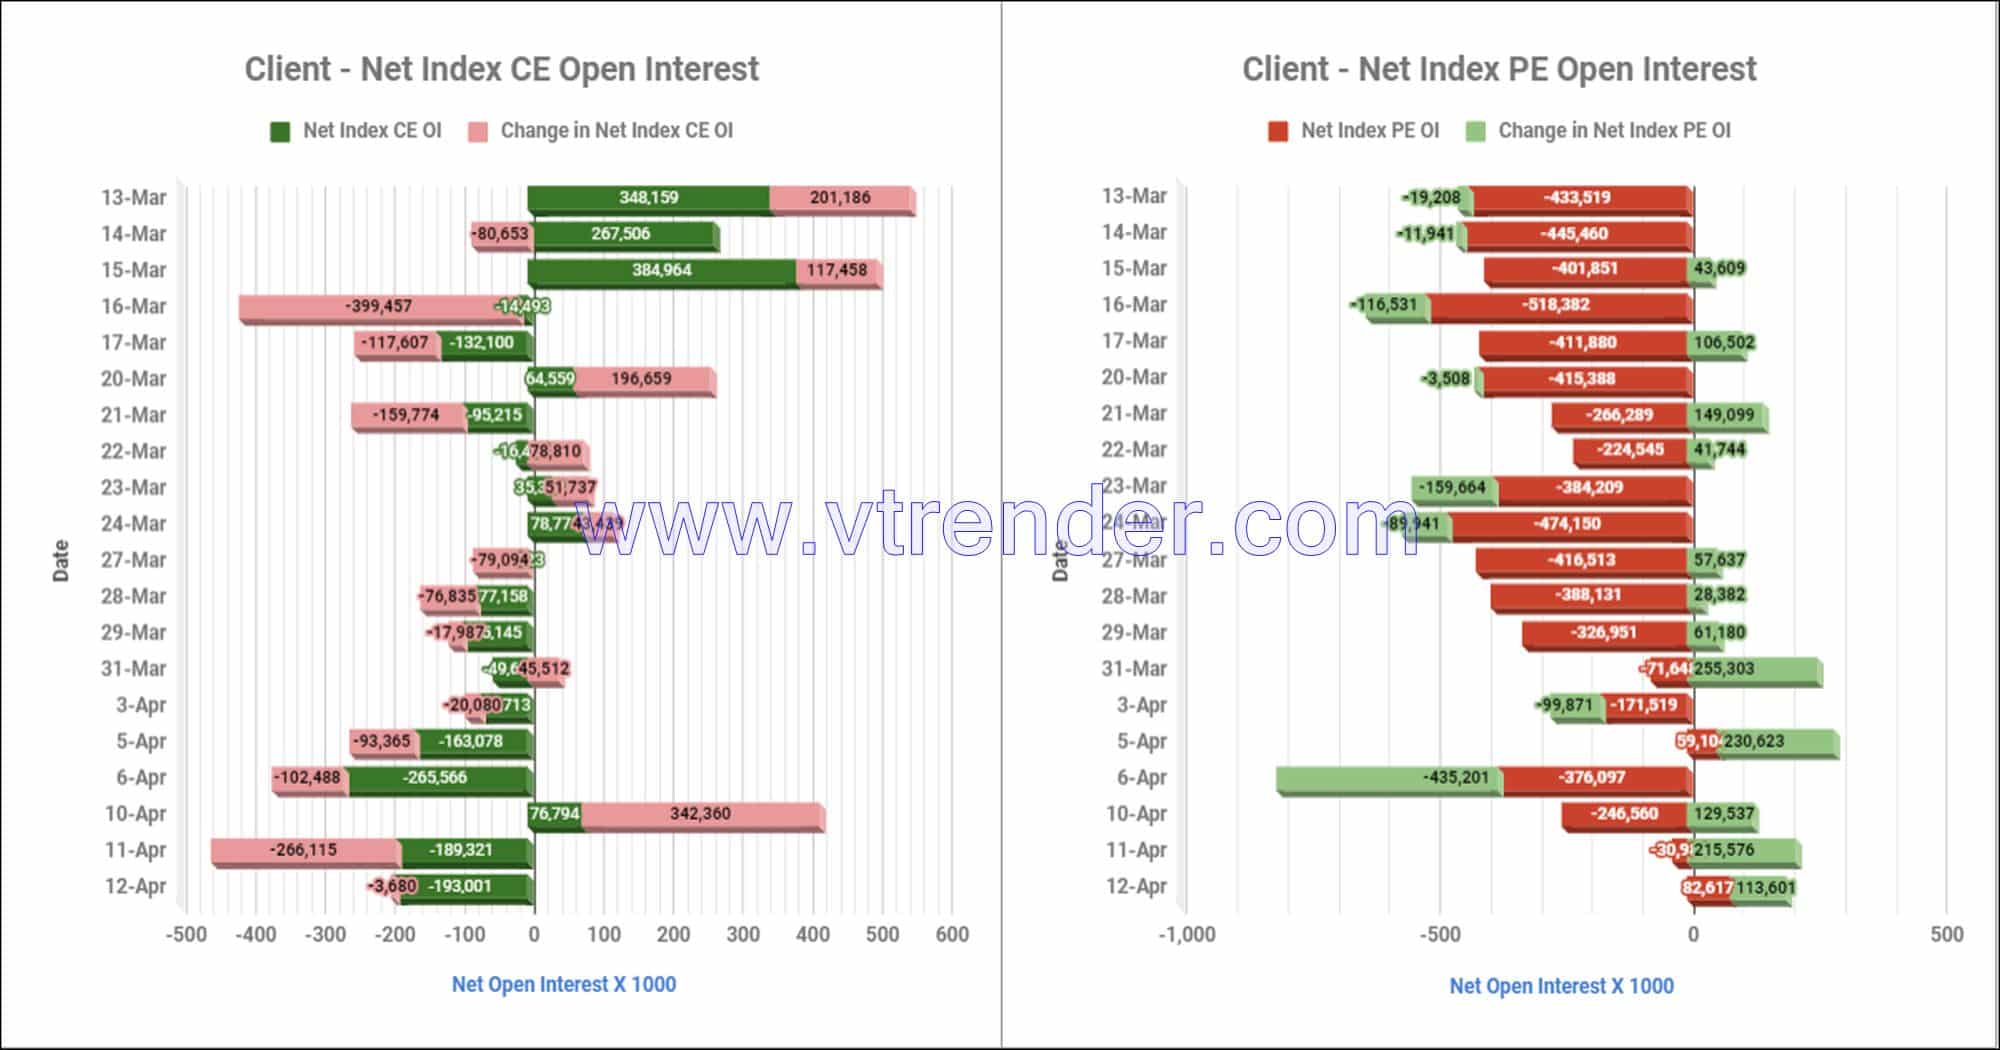 Clientinop12Apr Participantwise Net Open Interest And Net Equity Investments – 12Th Apr 2023 Client, Equity, Fii, Index Futures, Index Options, Open Interest, Prop